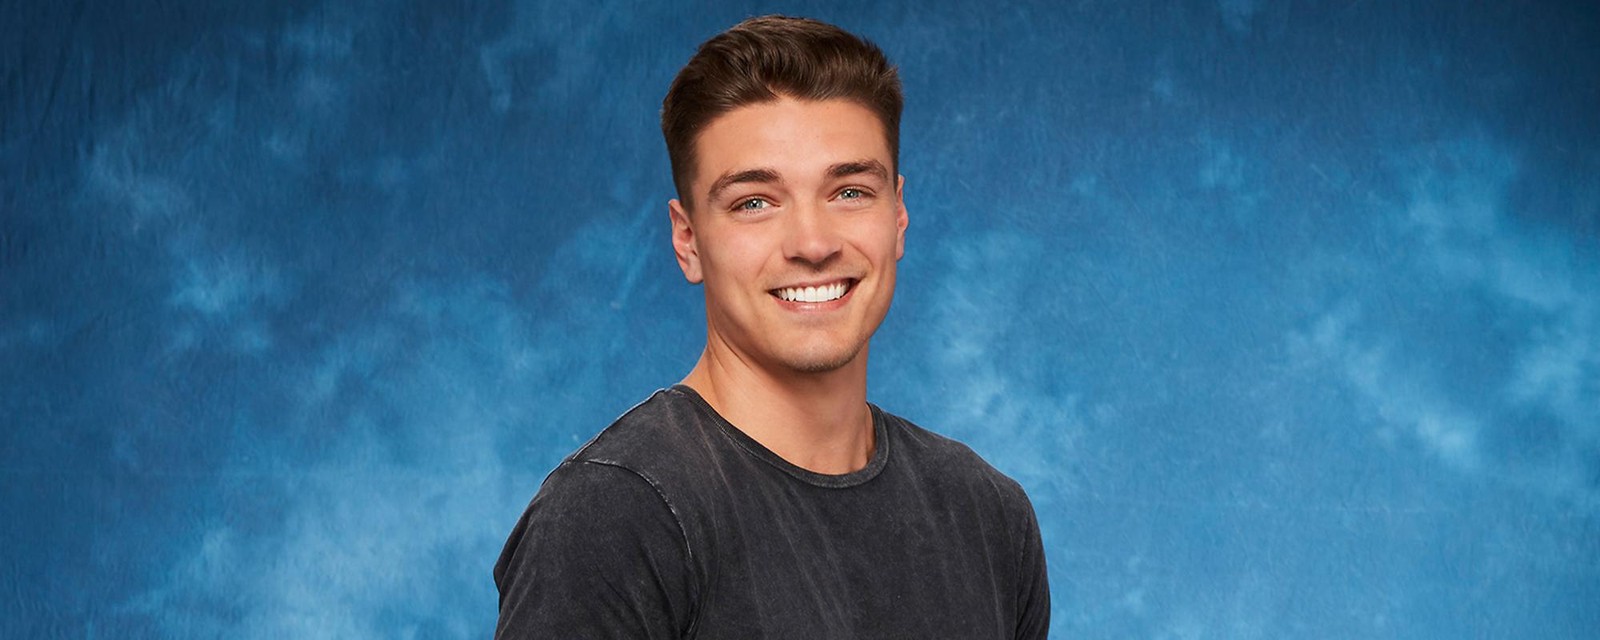 deanforbachelor - Dean Unglert - Bachelorette 13 - *Sleuthing Spoilers* - Page 16 1600x640-Q90_ab4abf230bb1cdebdbf5aa35a583c300